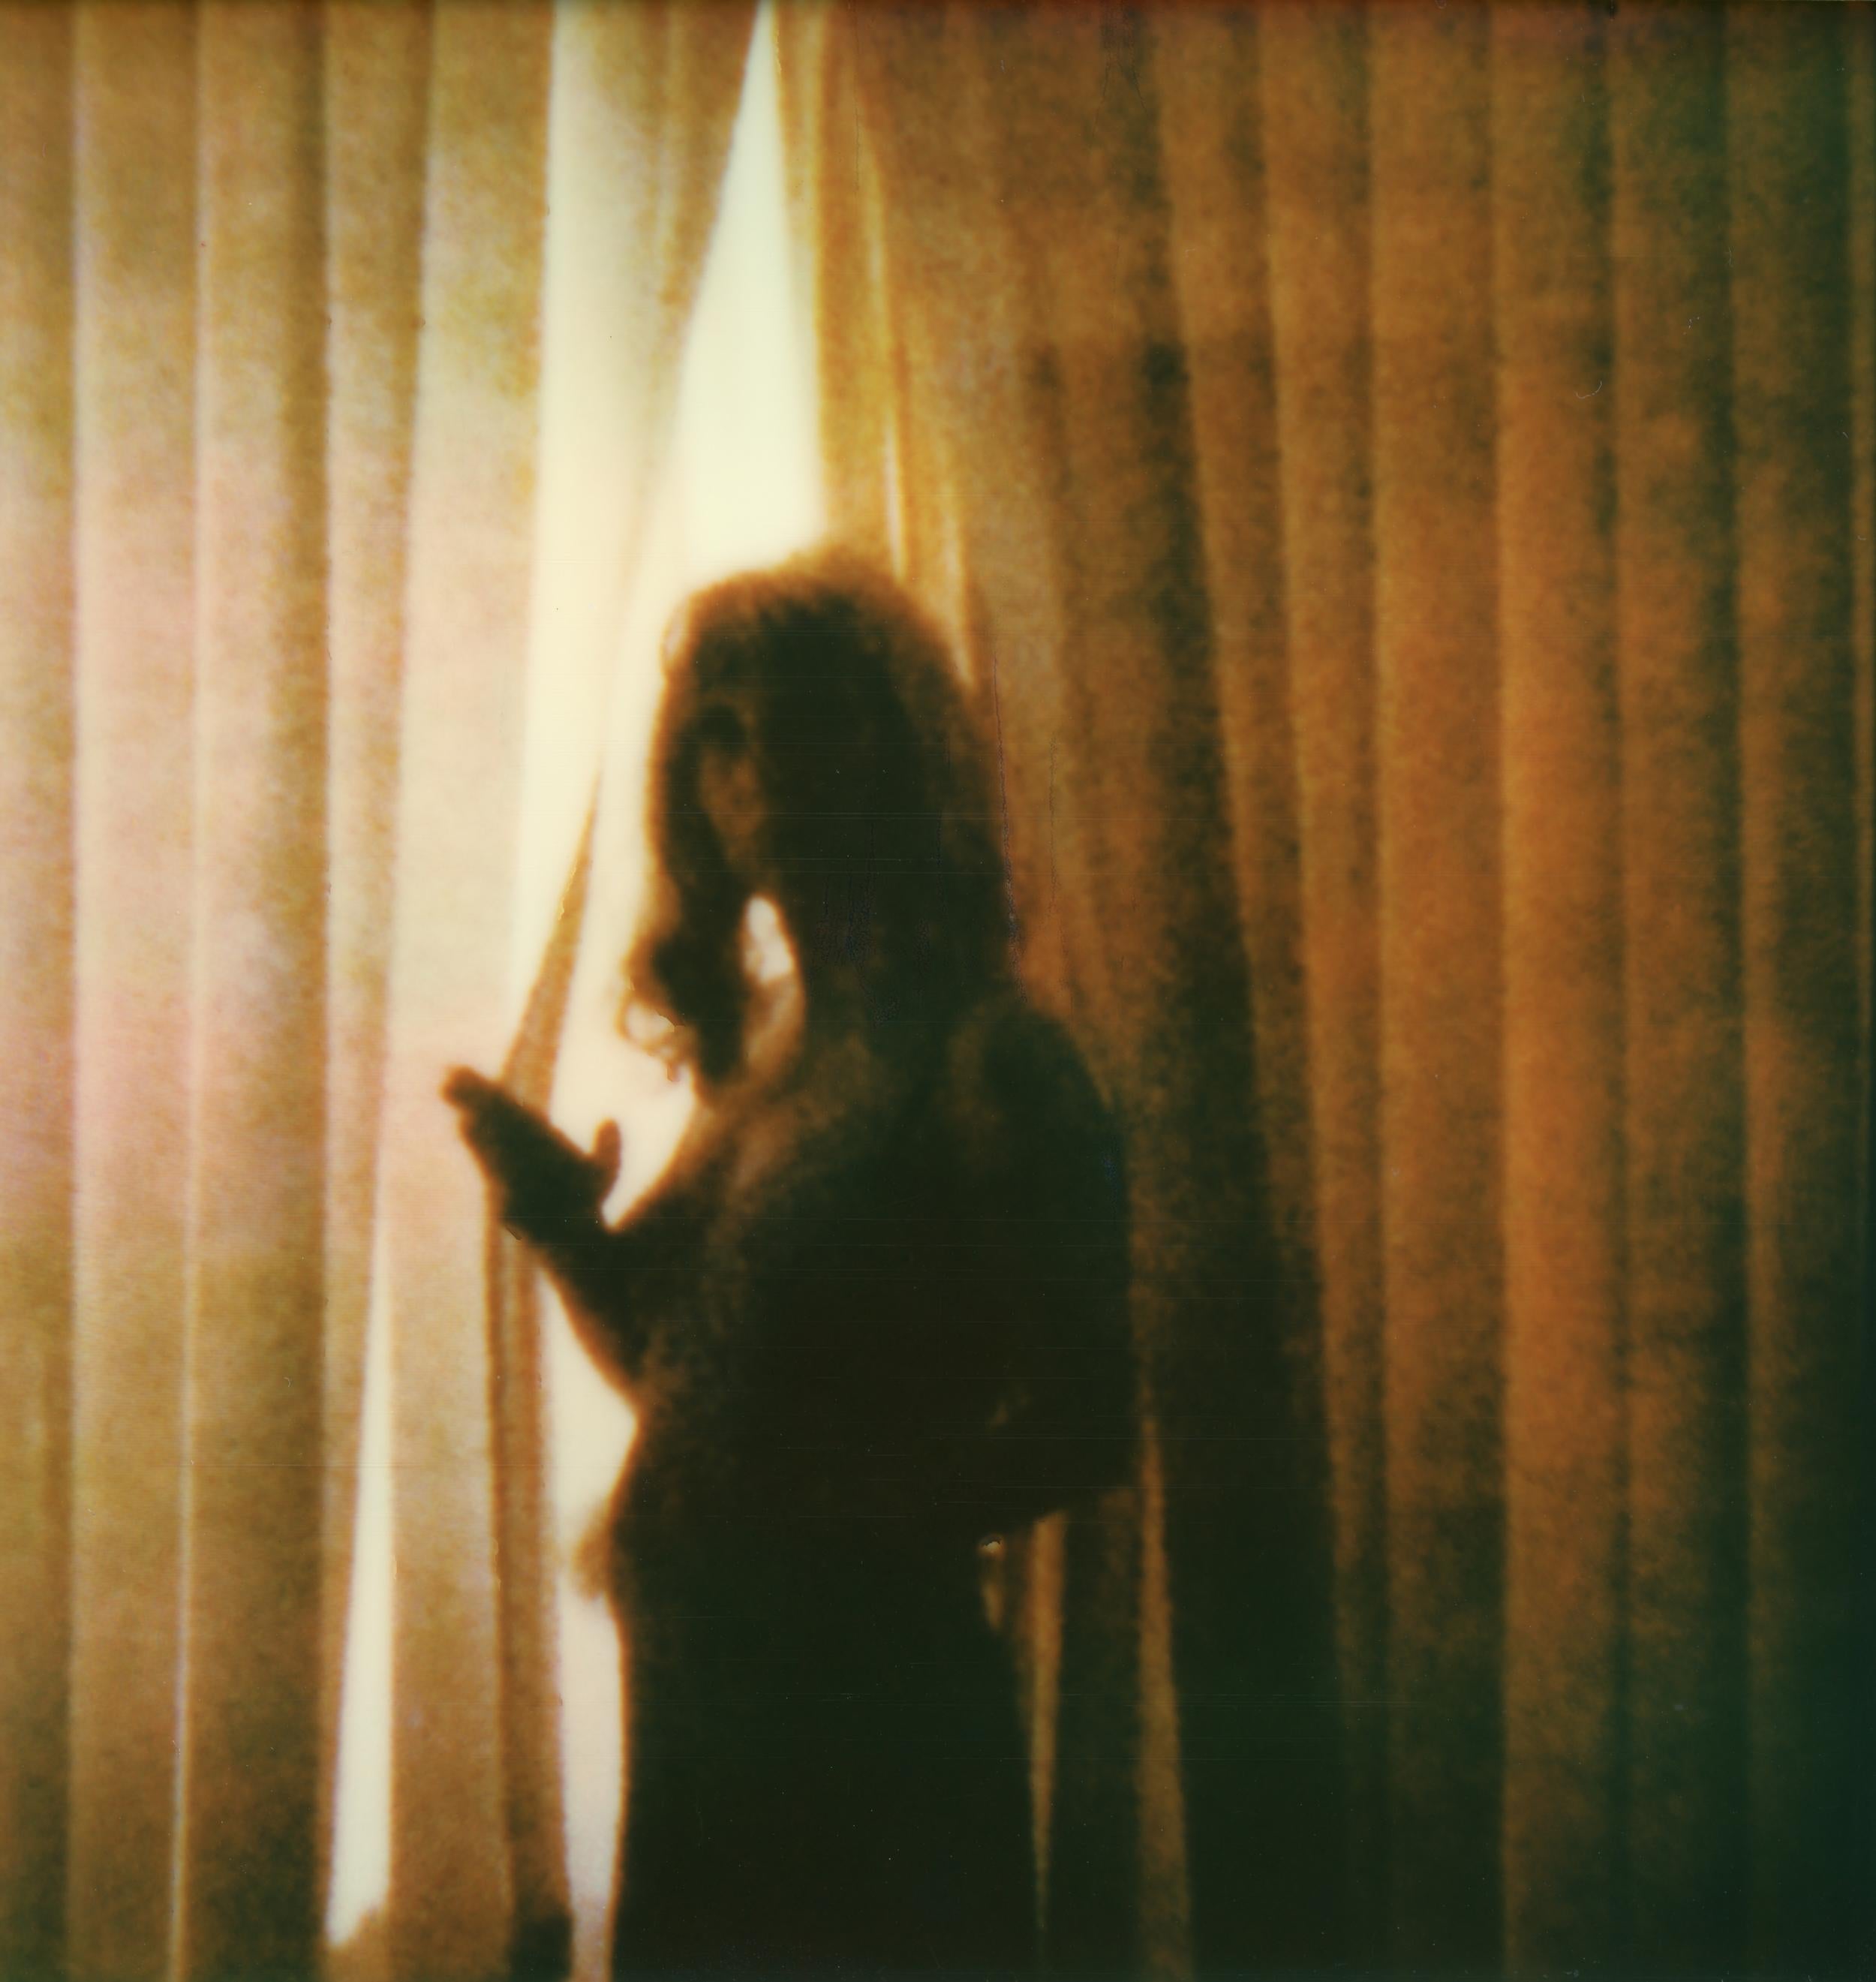 Nude Photograph Clare Marie Bailey - After Hours - Contemporary, Polaroid, Photographie, Figurative, Portrait